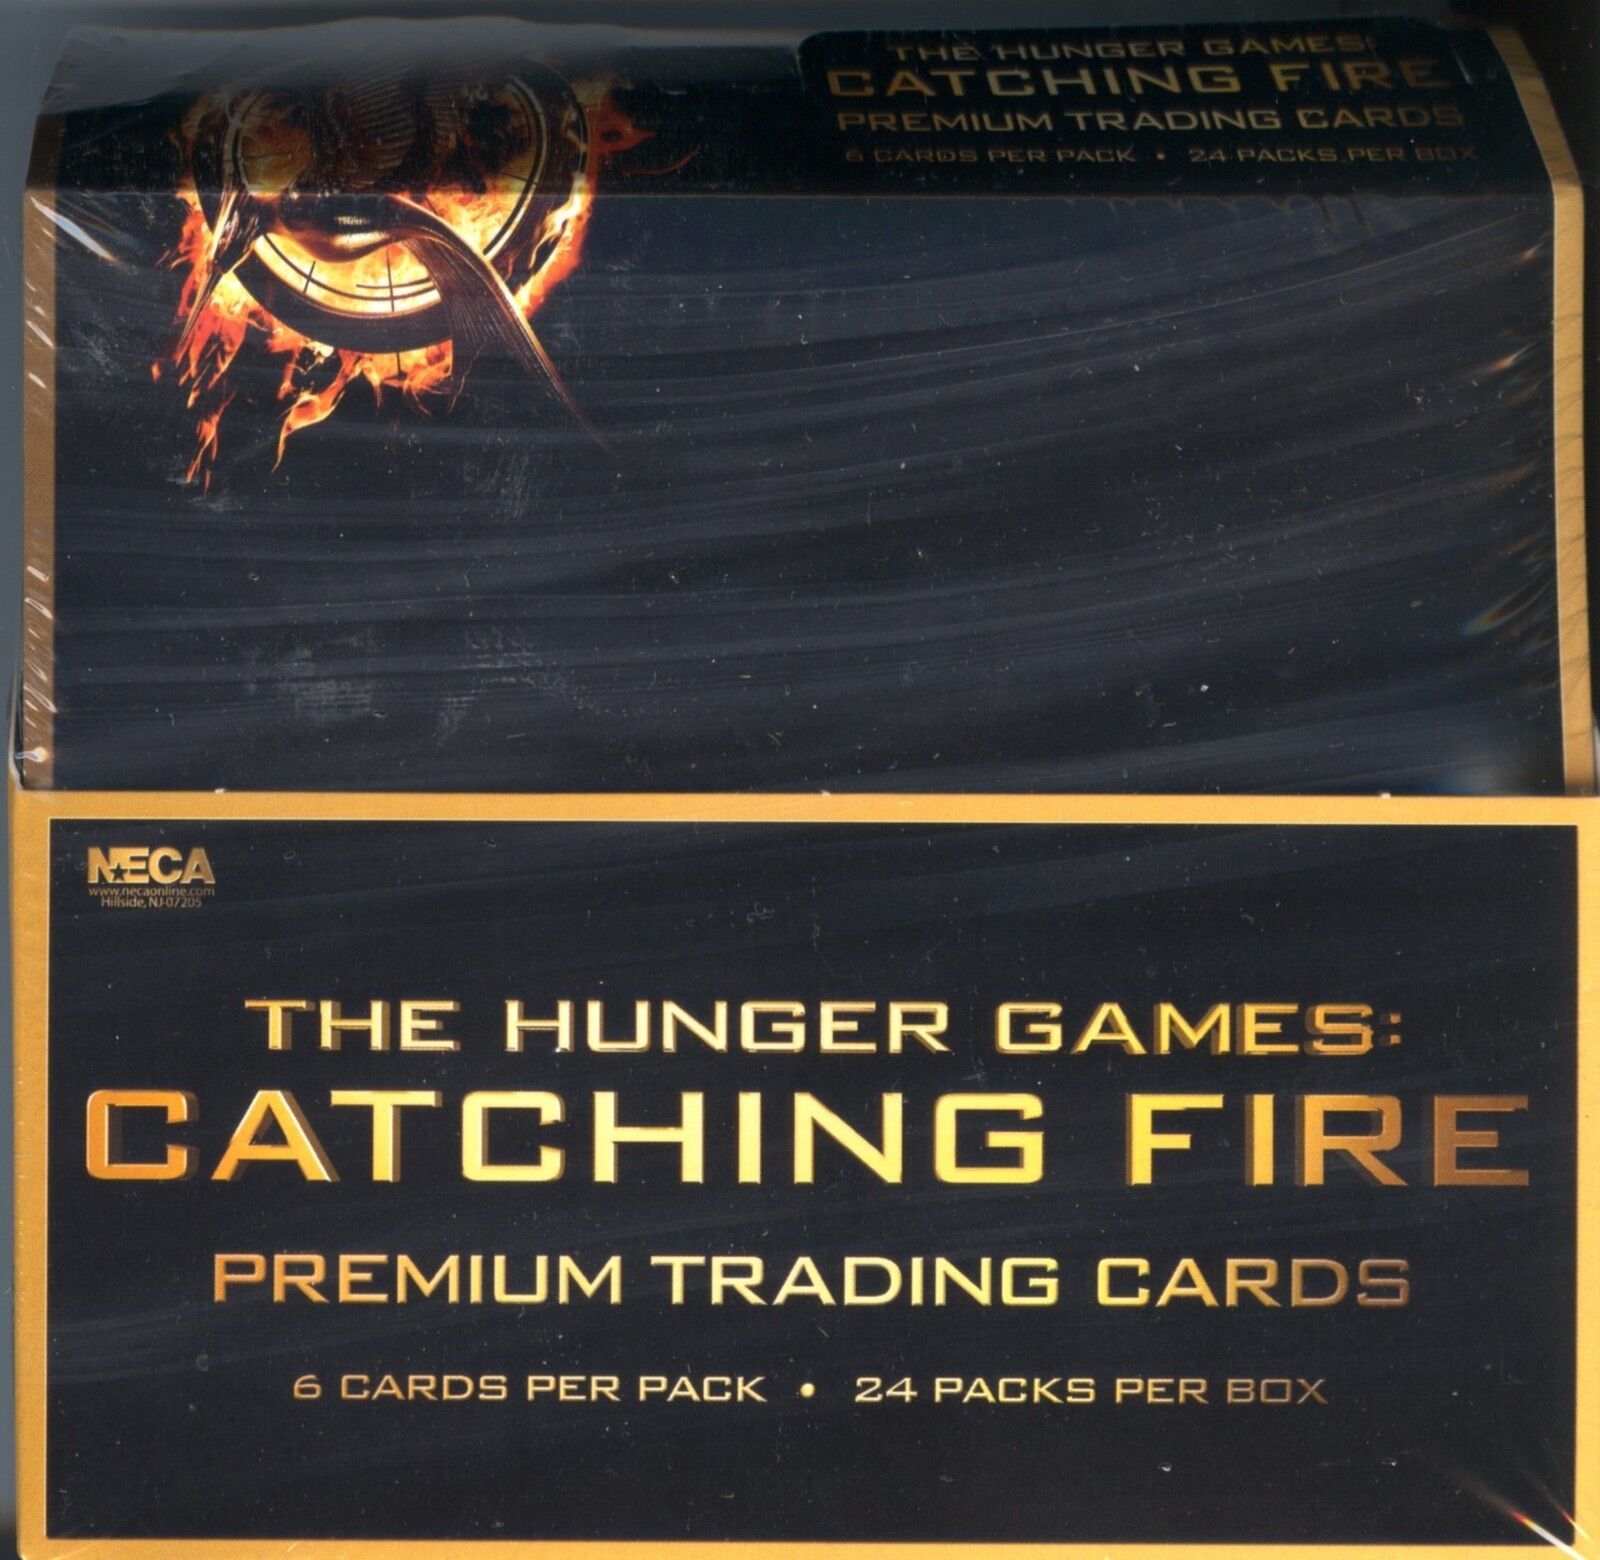 The Hunger Games: Catching Fire Movie Trading Cards Box (NECA)